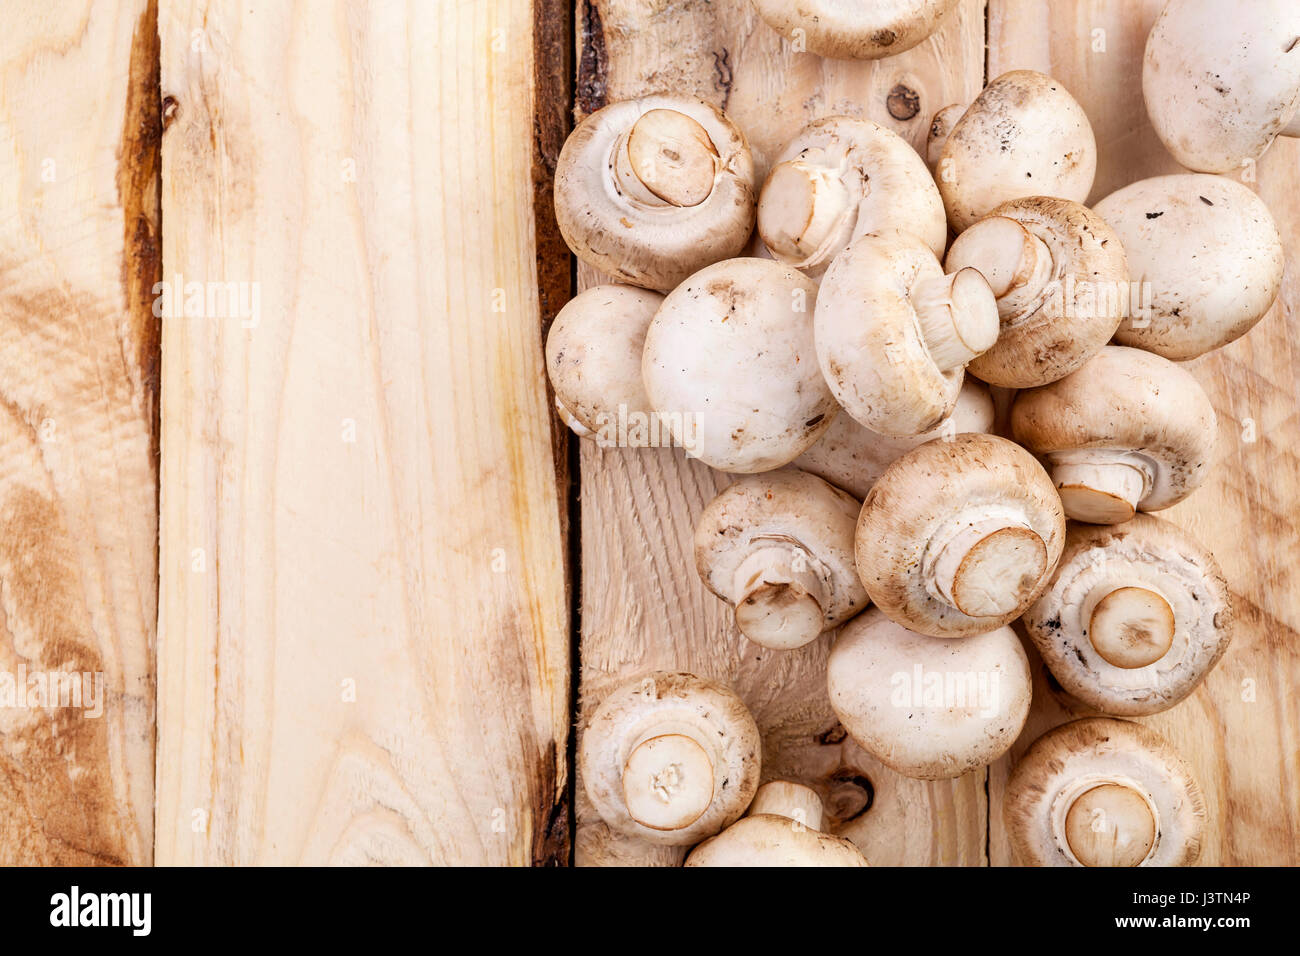 Mushrooms champignon on wooden table. Top view. Copy space. Stock Photo